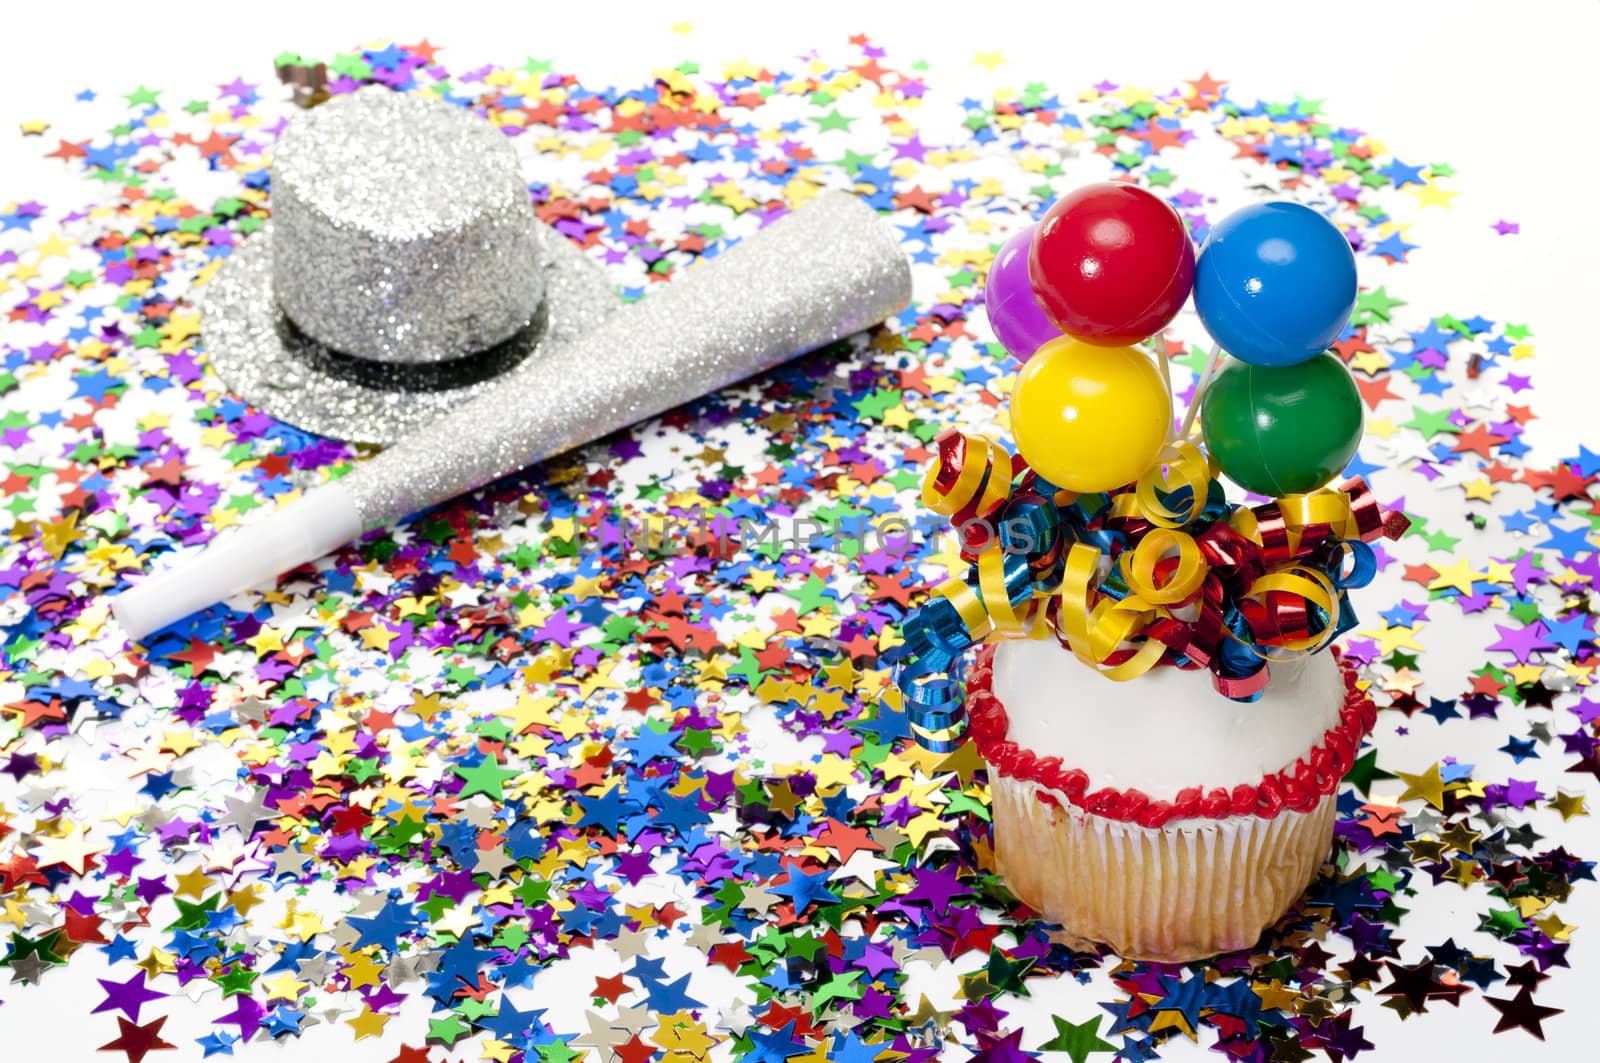 Cupcake, Confetti, Horn, and Hat at Party by dehooks